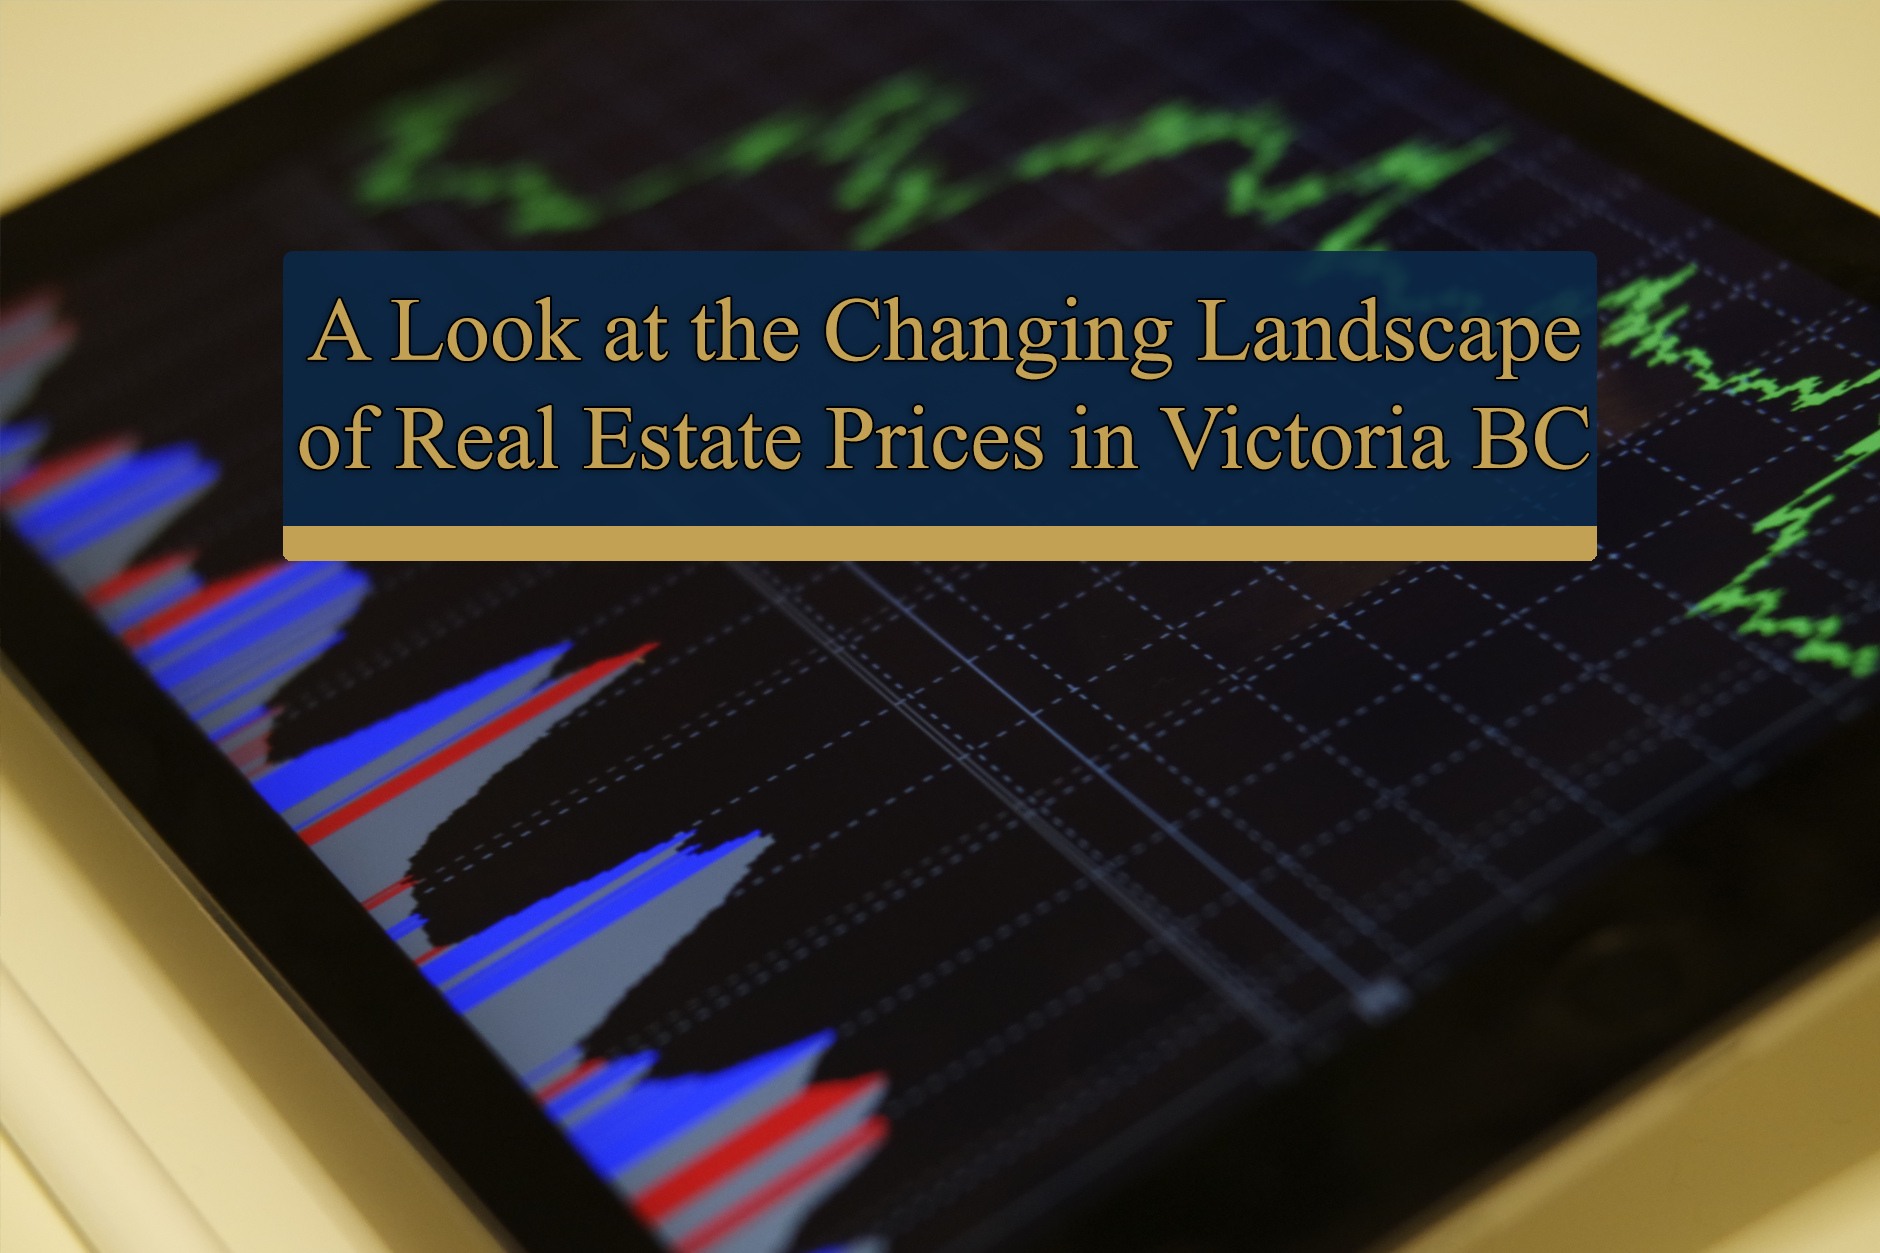 The Changing Landscape of Real Estate Prices in Victoria BC